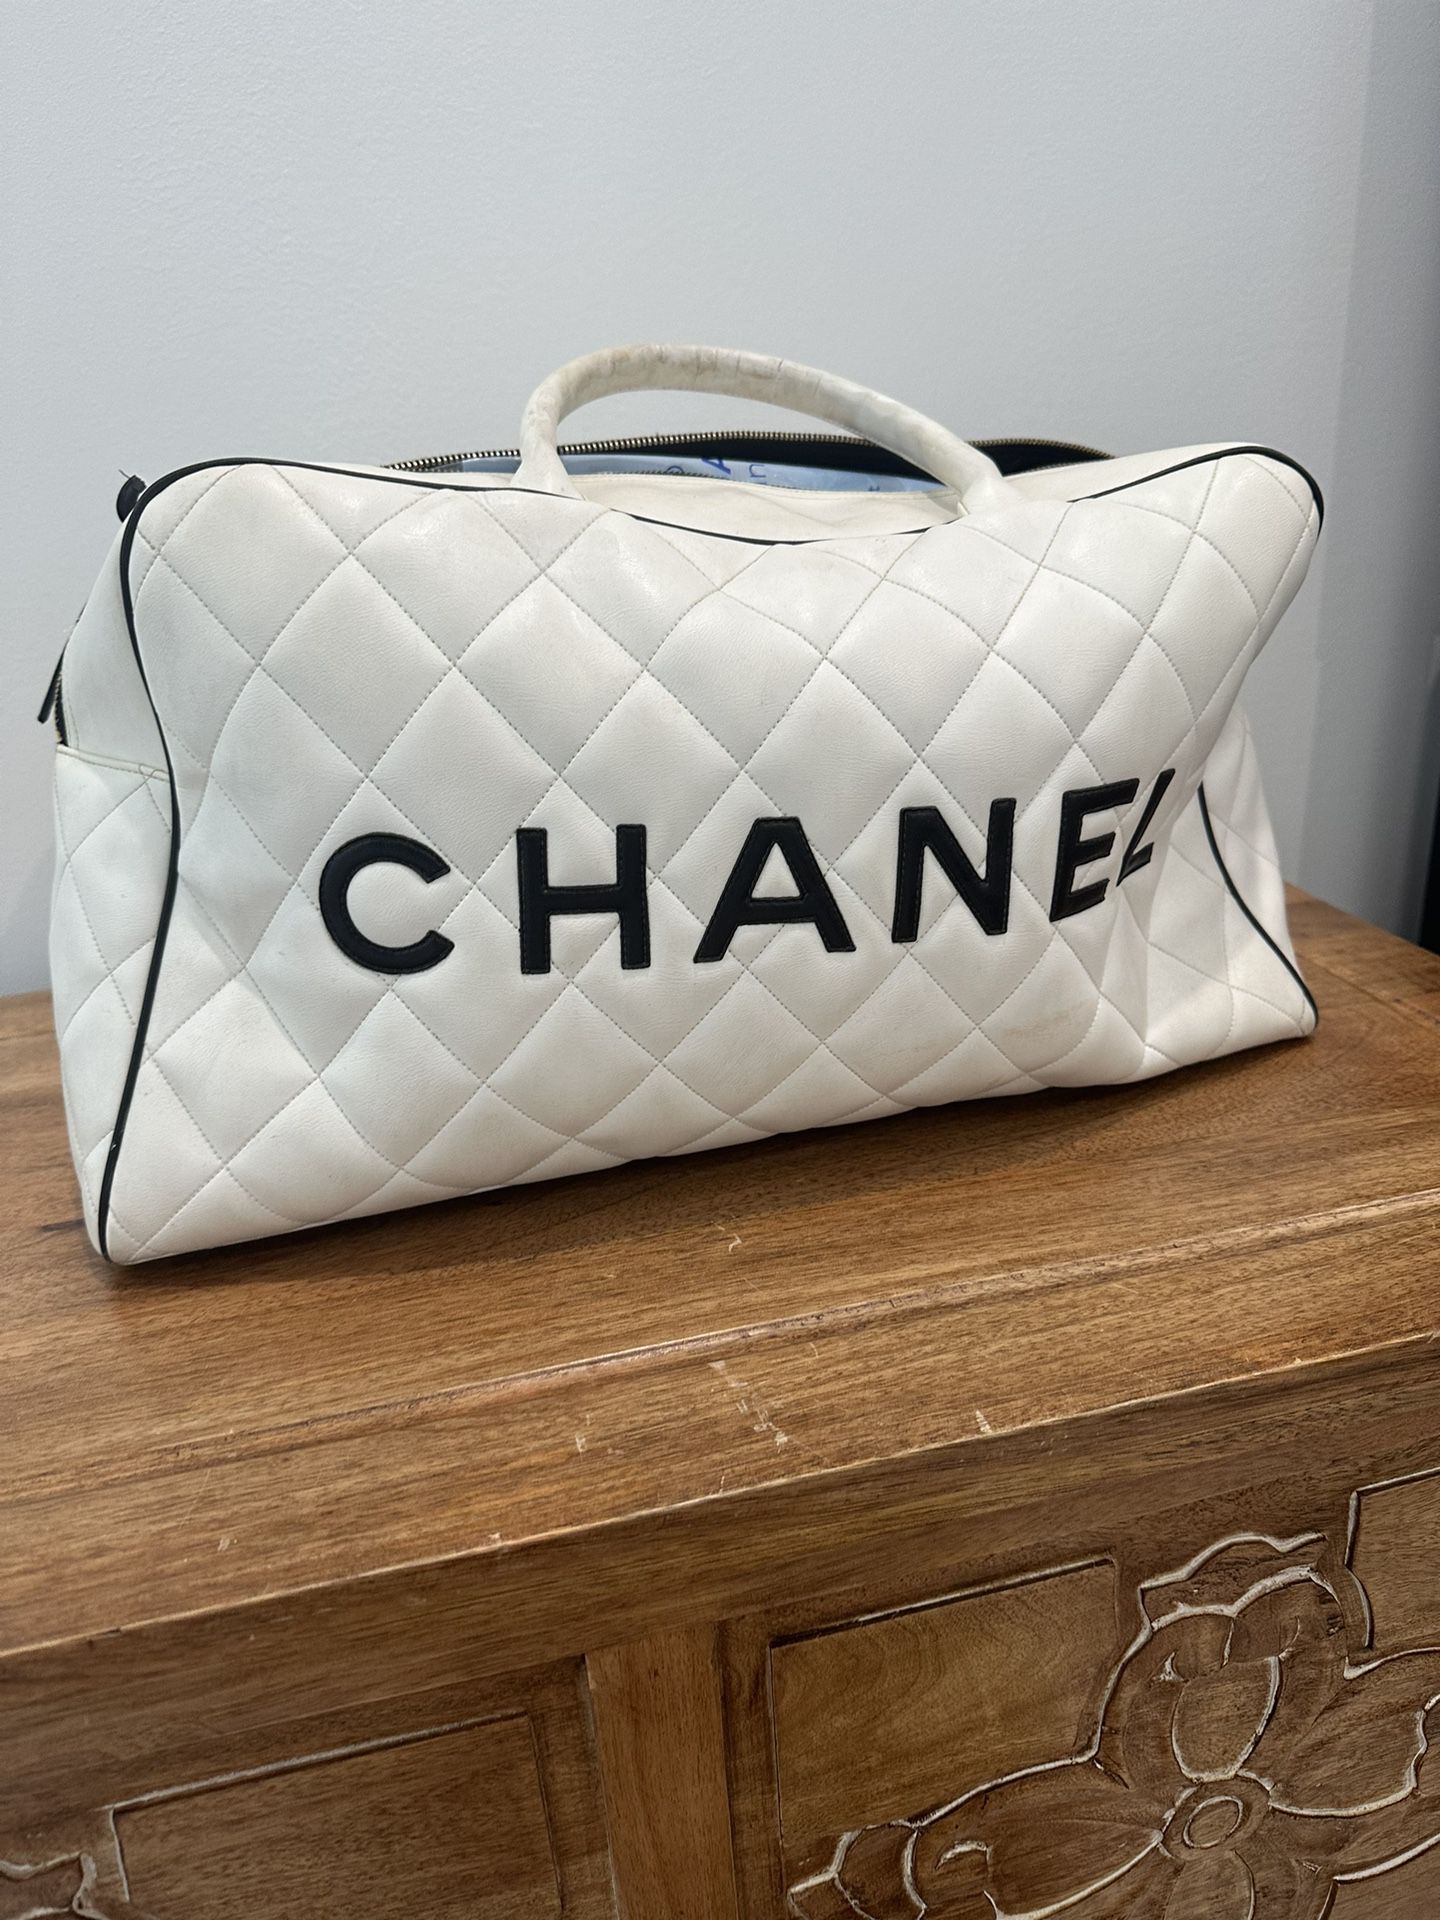 ARCHIVE CHANEL BAG WITH WEAR